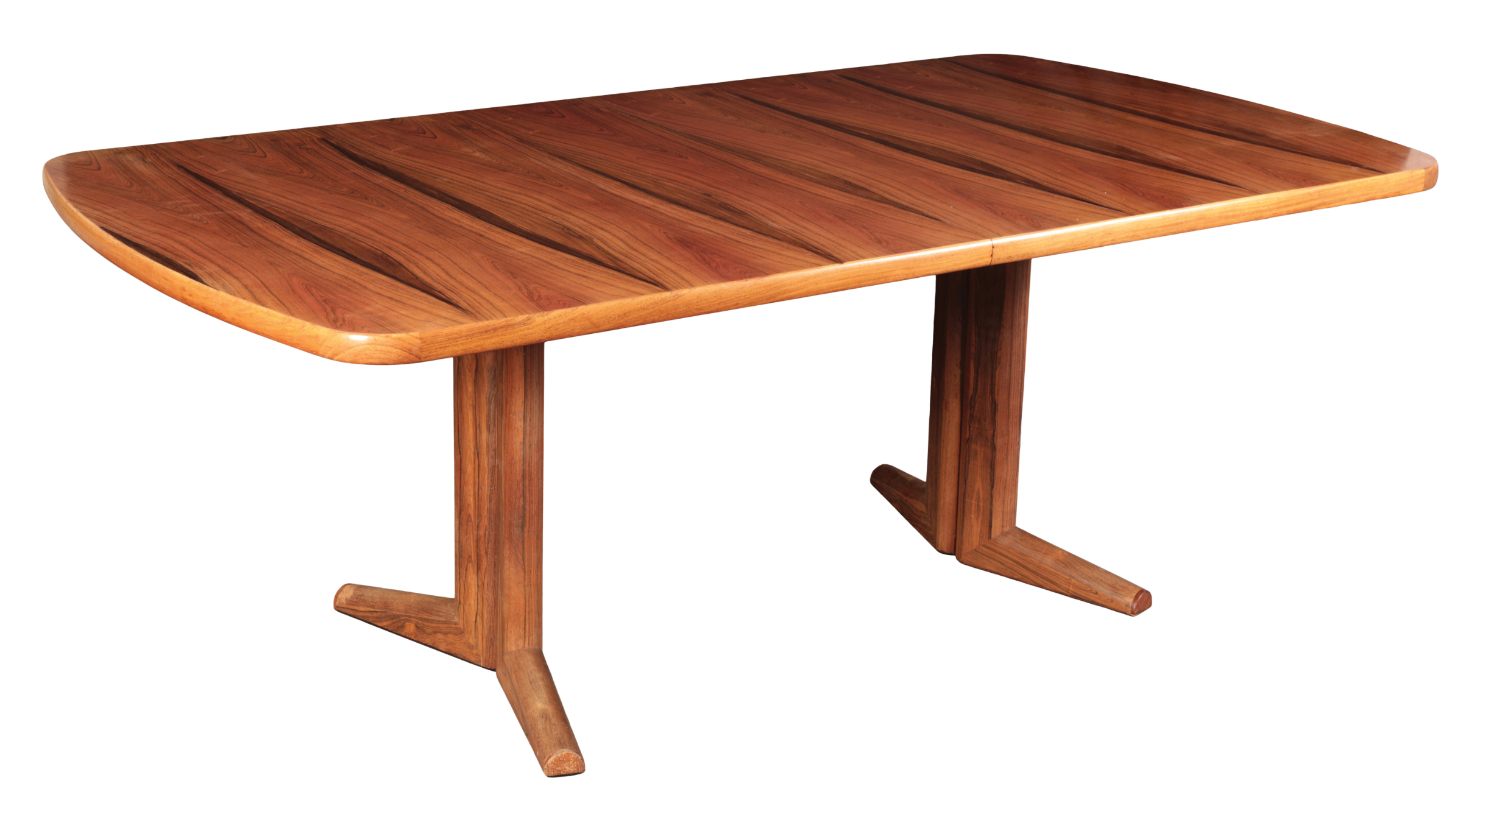 MARTIN HALL FOR GORDON RUSSELL: A ROSEWOOD 'MARLOW' EXTENDING DINING TABLE - Image 2 of 3